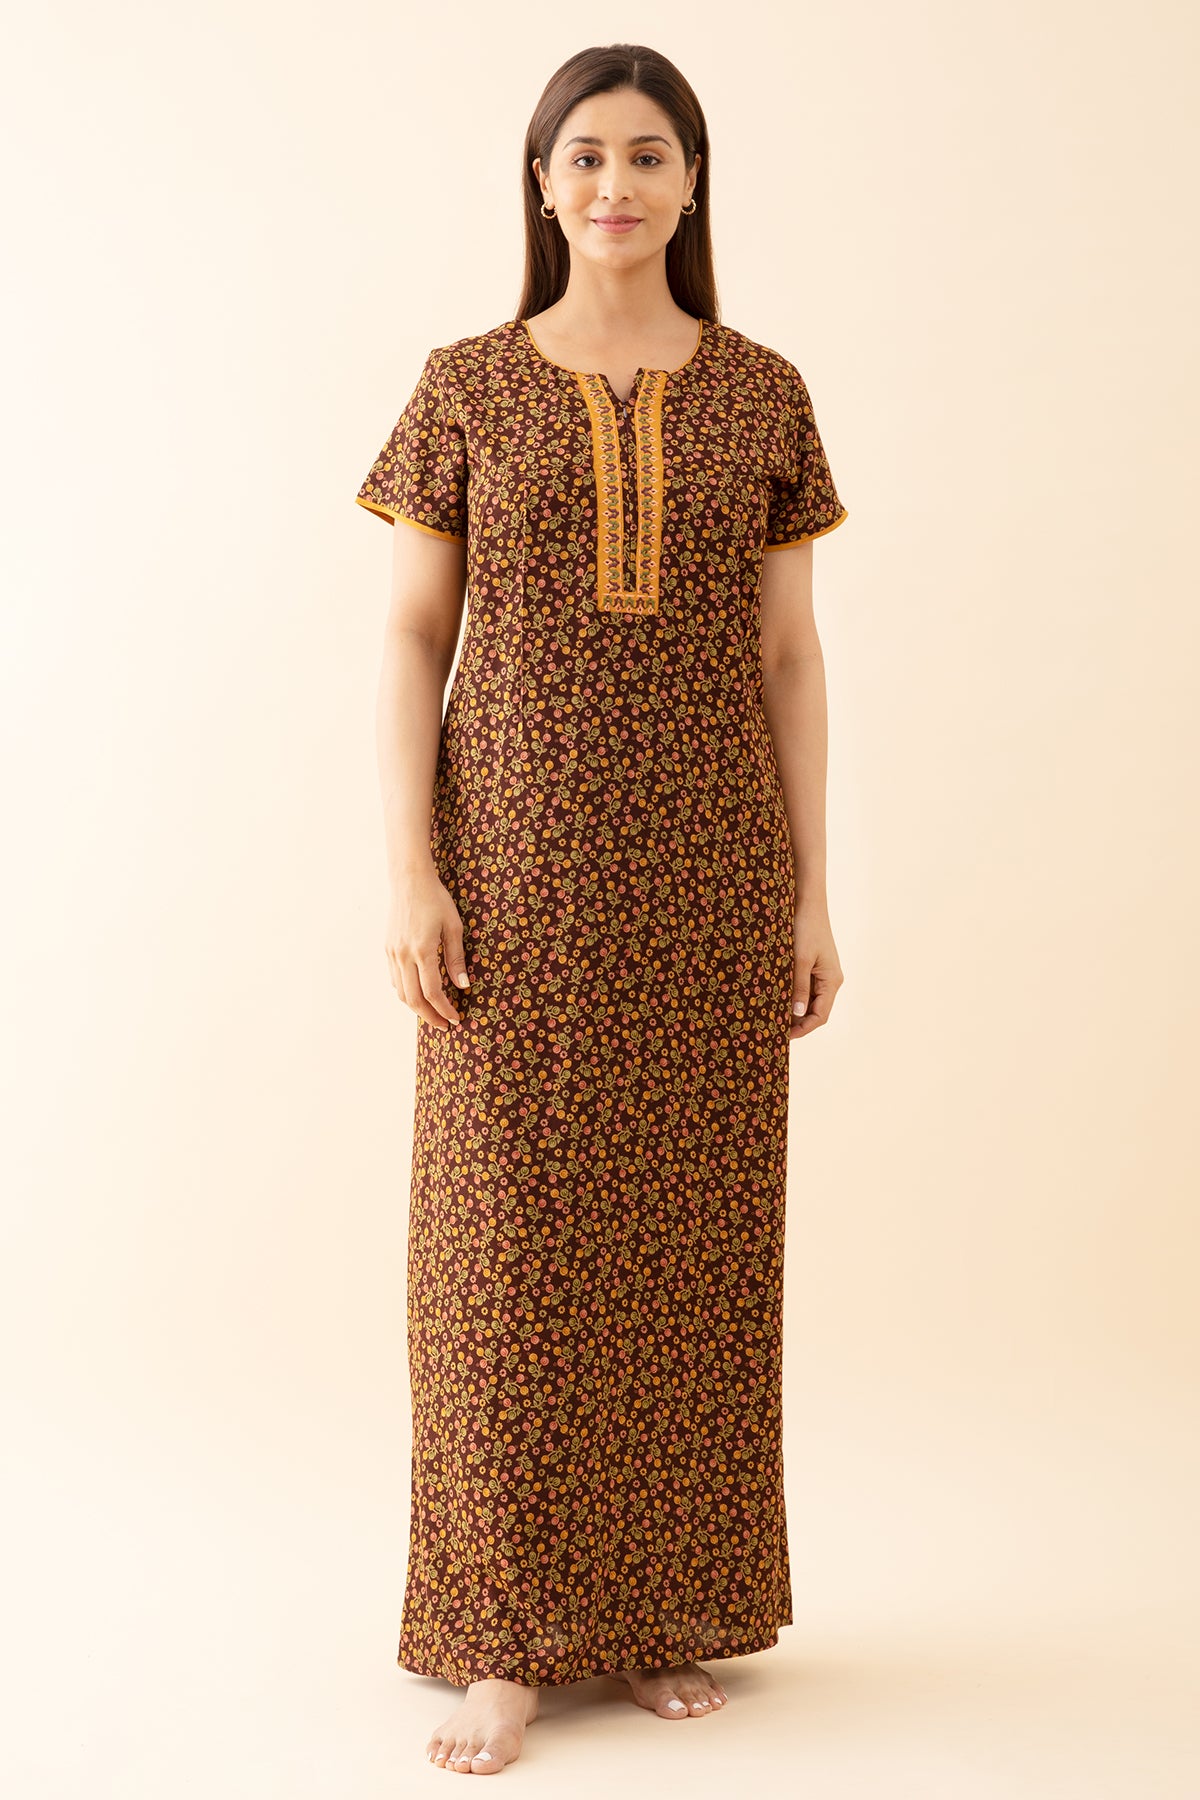 Tulip Floral Printed with Contrast Embroidered Yoke - Brown